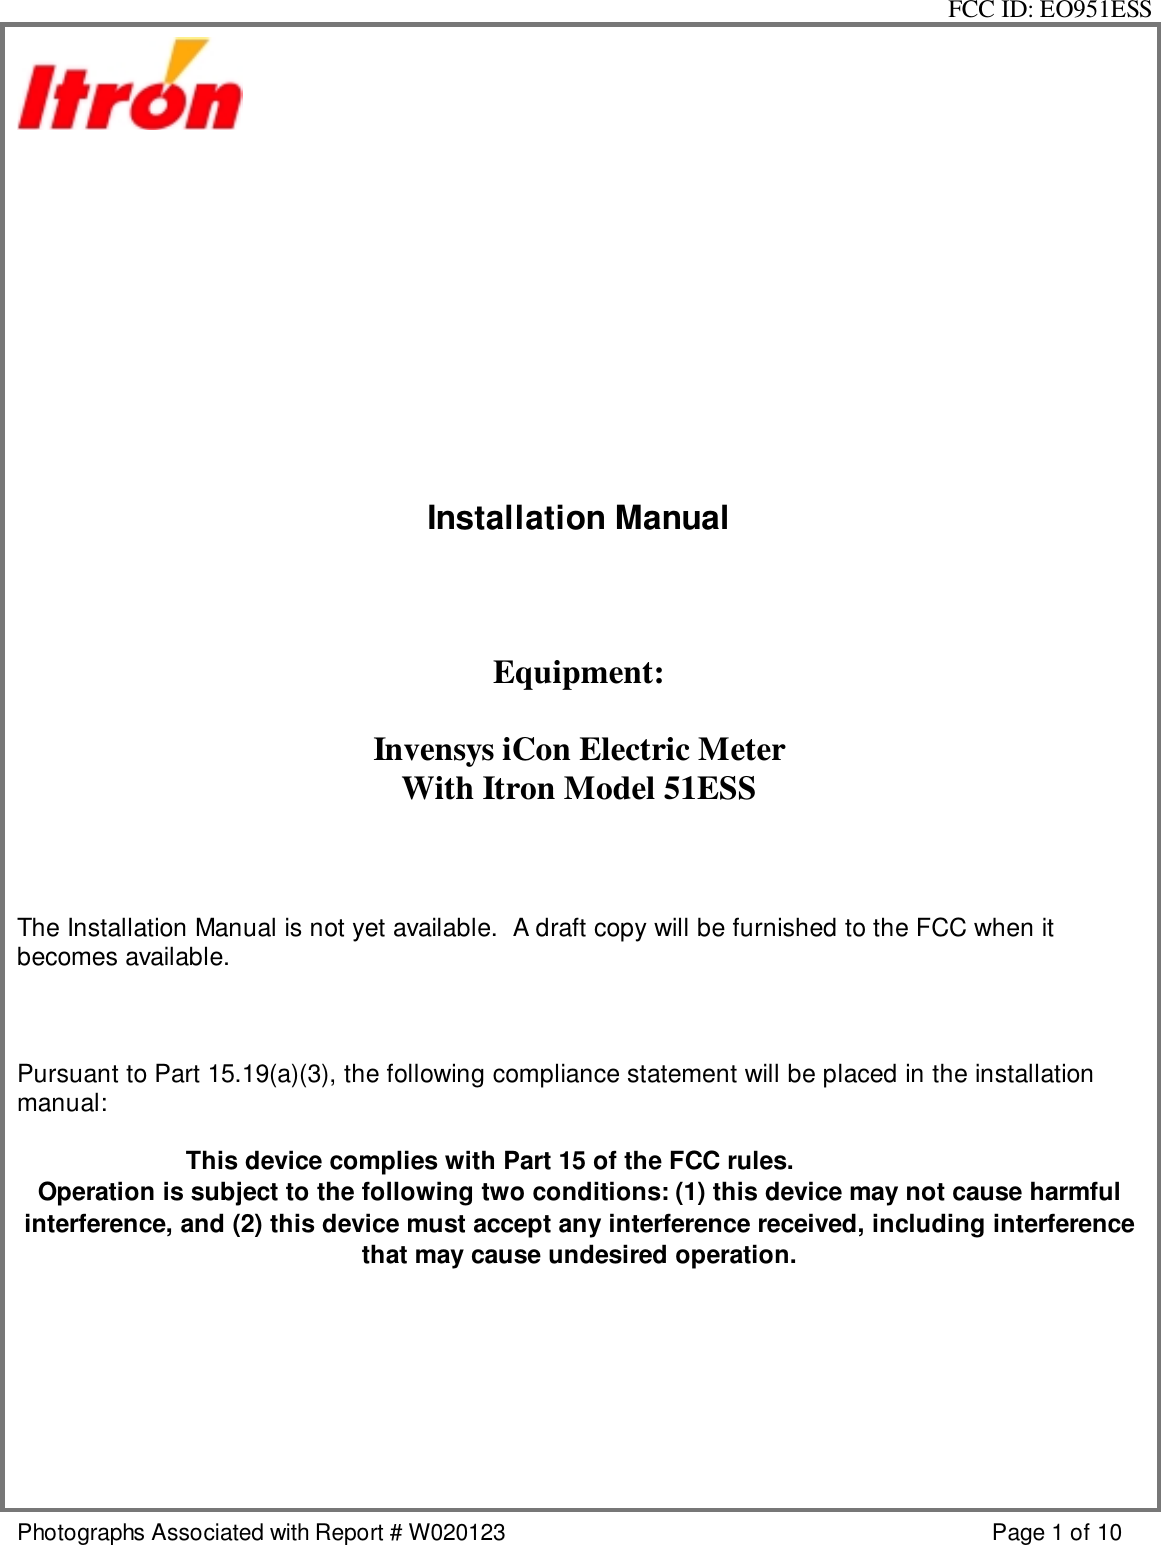 FCC ID: EO951ESSPhotographs Associated with Report # W020123 Page 1 of 10Installation ManualEquipment:Invensys iCon Electric MeterWith Itron Model 51ESSThe Installation Manual is not yet available.  A draft copy will be furnished to the FCC when itbecomes available.Pursuant to Part 15.19(a)(3), the following compliance statement will be placed in the installationmanual:This device complies with Part 15 of the FCC rules.Operation is subject to the following two conditions: (1) this device may not cause harmfulinterference, and (2) this device must accept any interference received, including interferencethat may cause undesired operation.